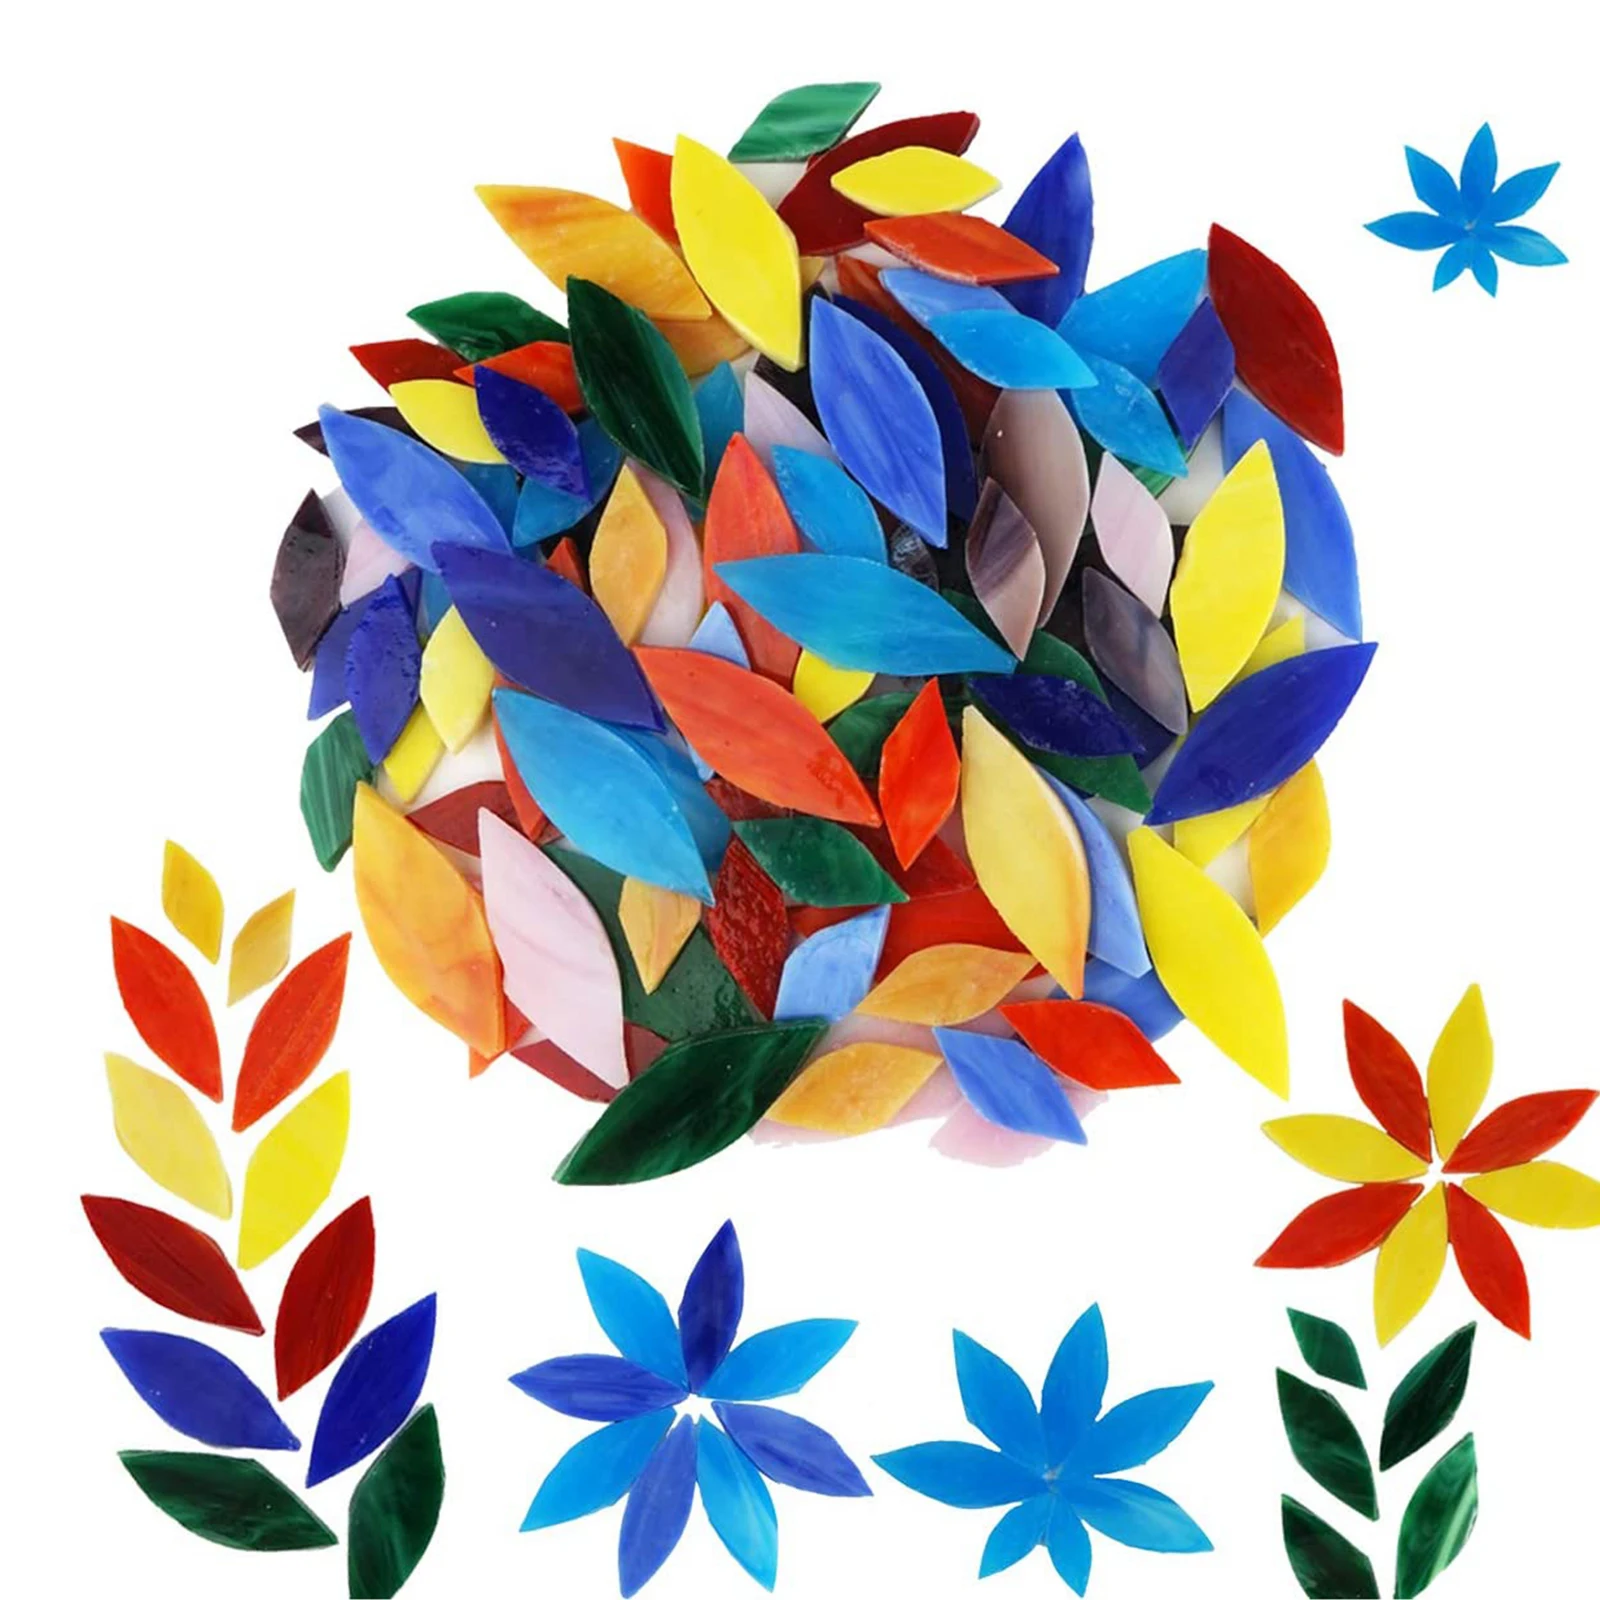 100 Pcs Assorted Colors Mosaic Tiles Hand-Cut Stained Glass for Art Pots